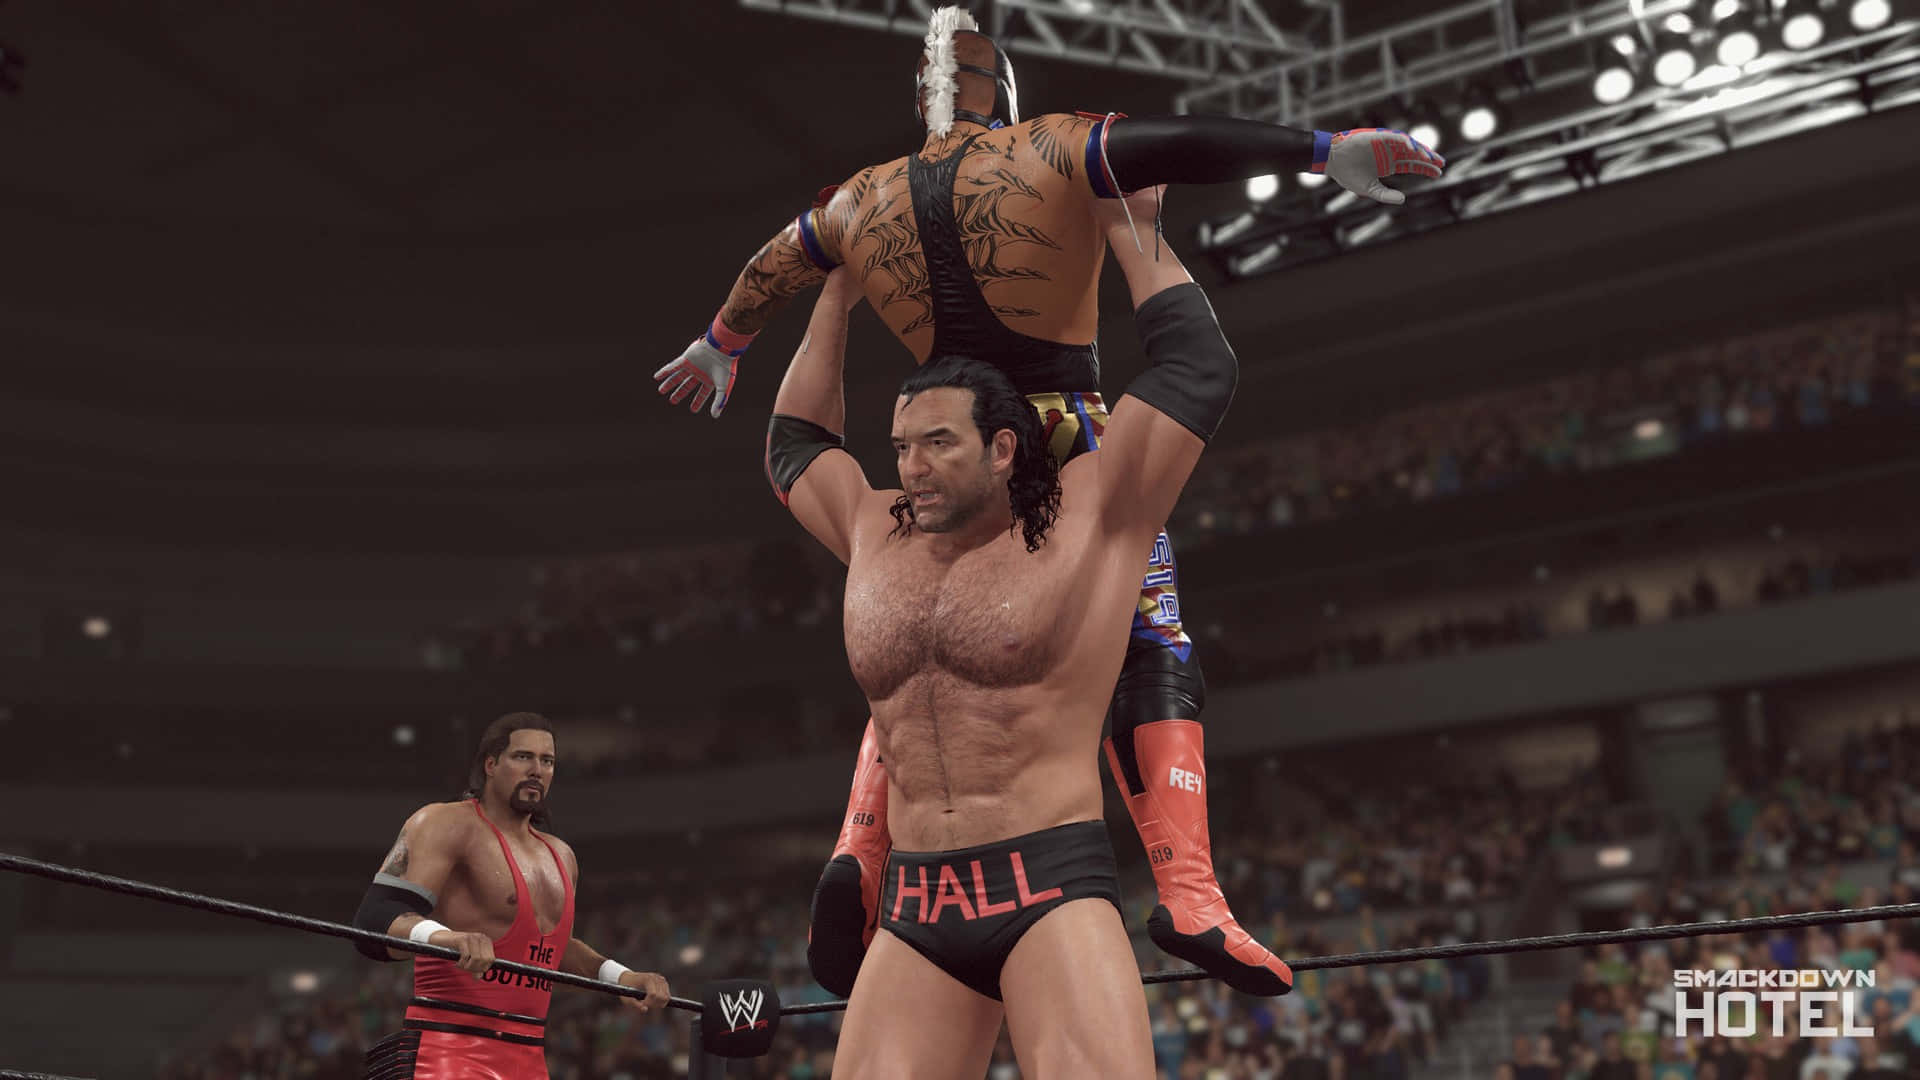 Wwe Player Scott Hall Fighting Picture